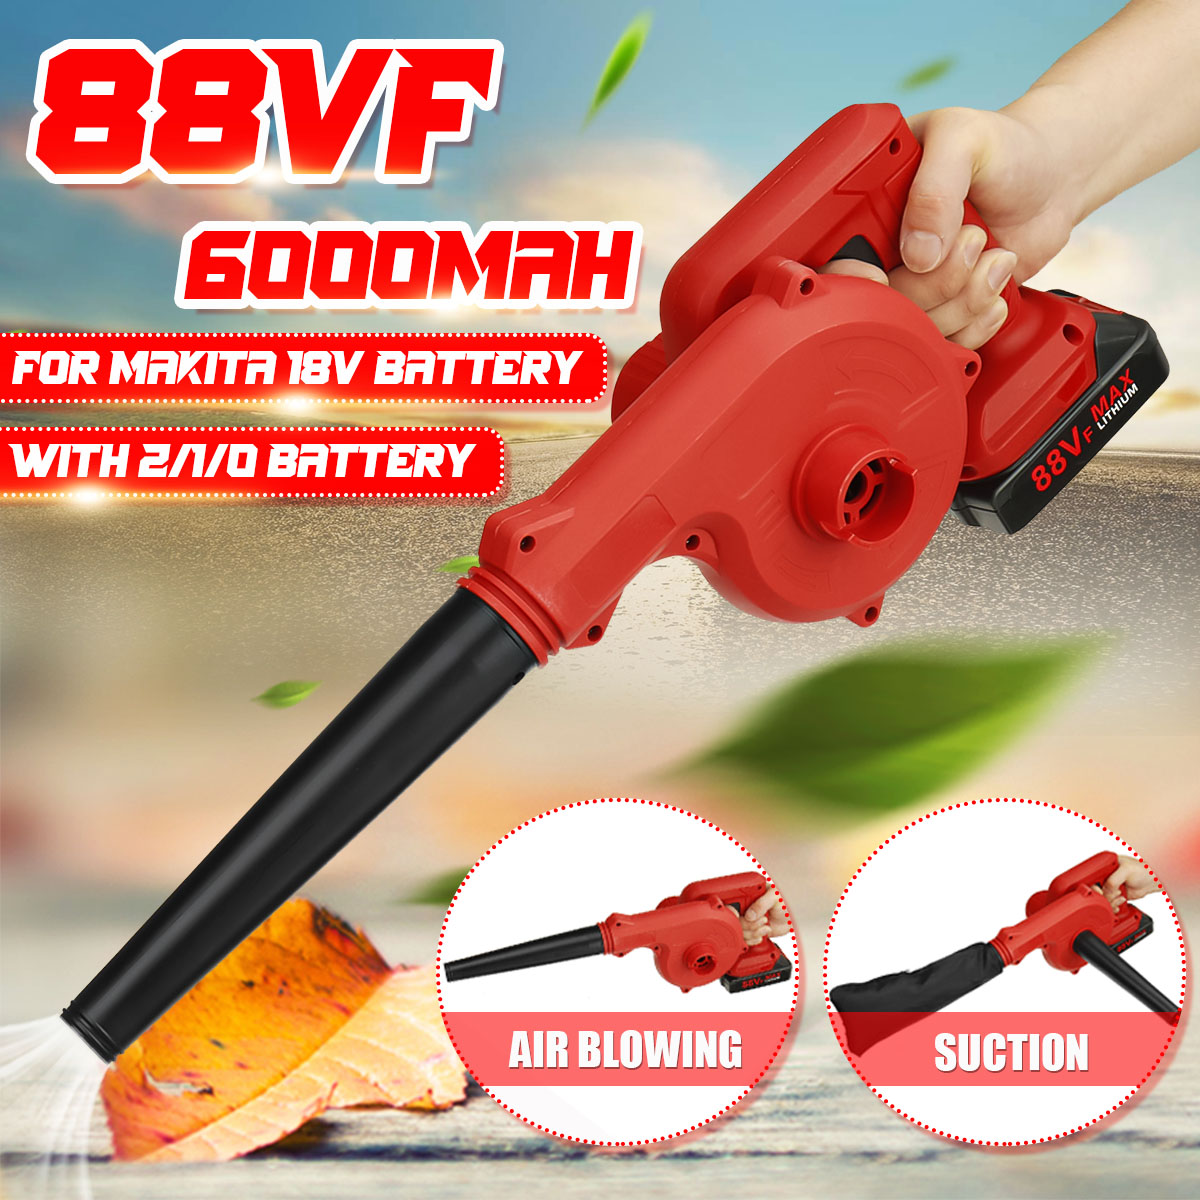 88VF-Garden-Cordless-Air-Blower-Vacuum-Cleaner-Blower-For-Dust-Blowing-W-None12pcs-Battery-Also-for--1851657-1